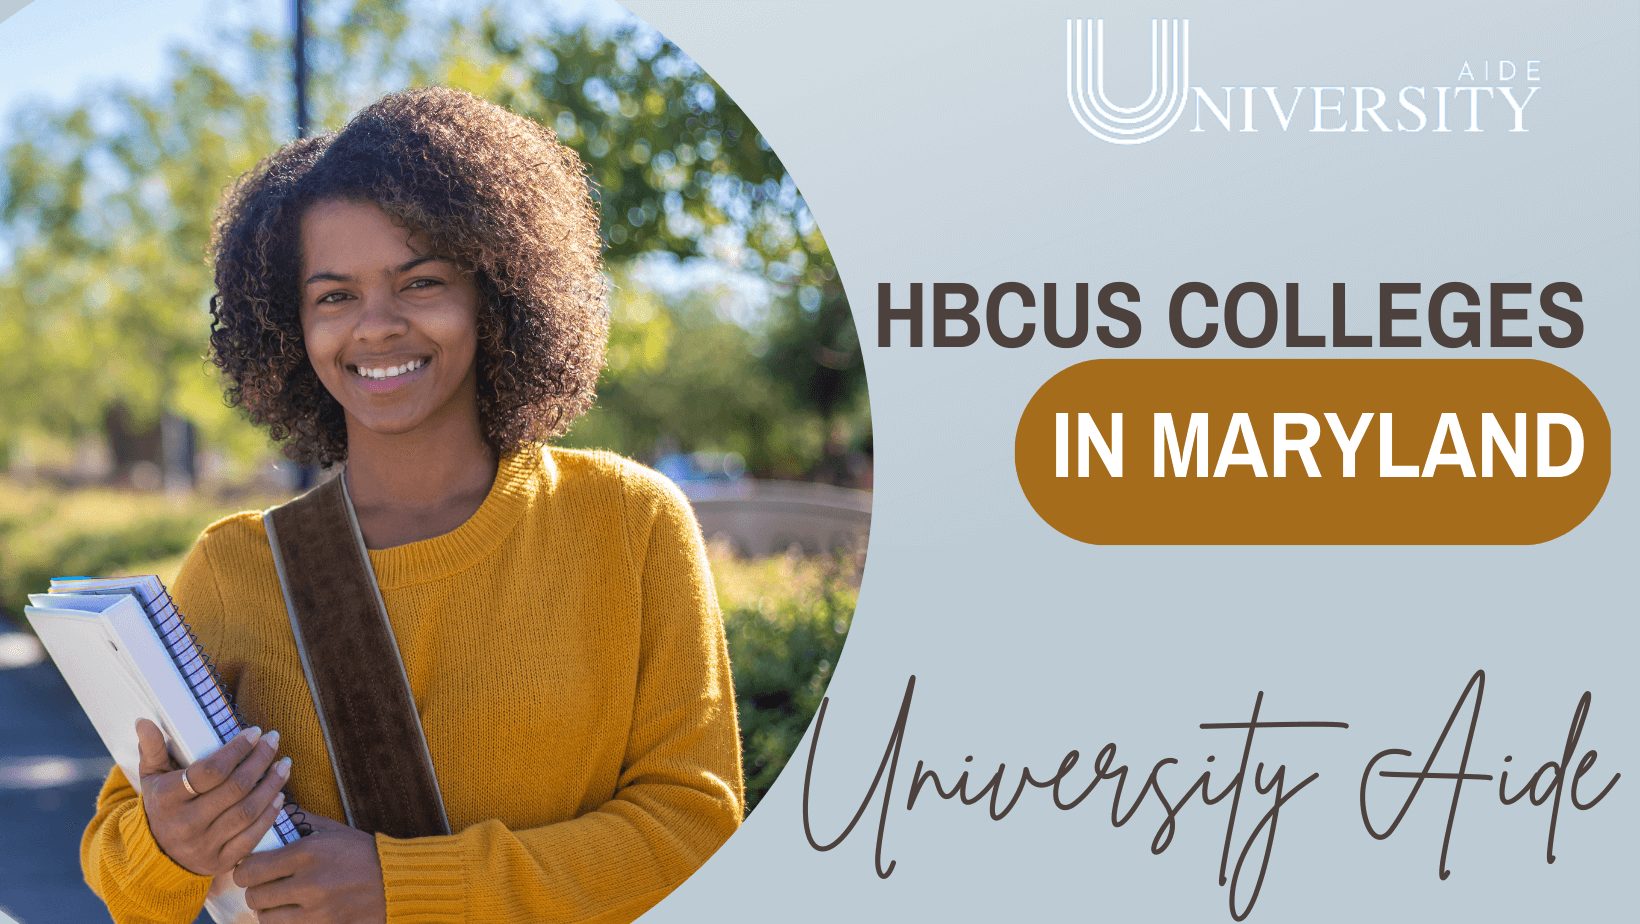 HBCUs in Maryland – Maryland Historically Black Colleges and Universities